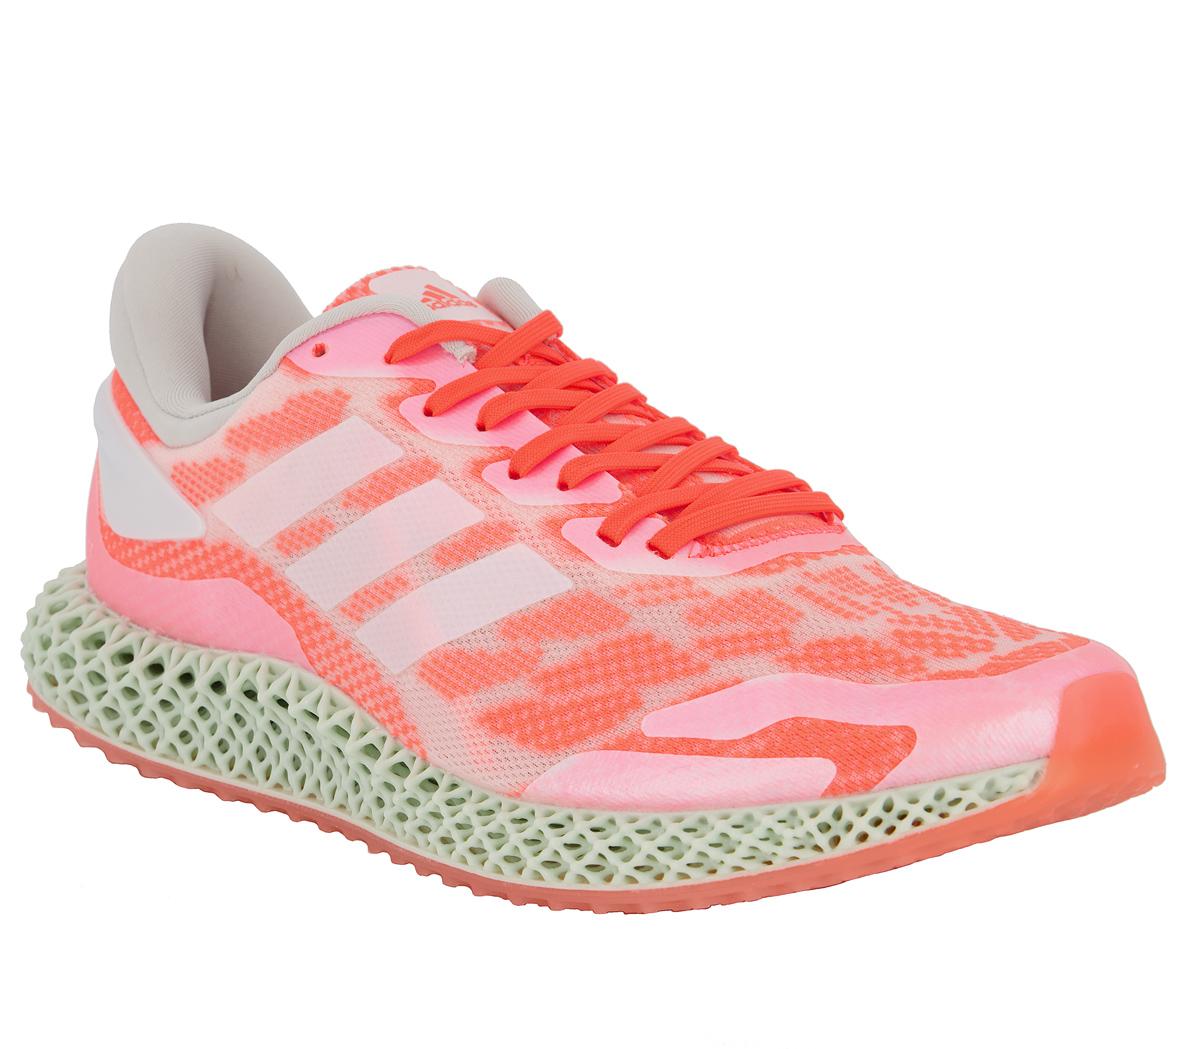 adidas4d 1.0 TrainersWhite Signal Coral